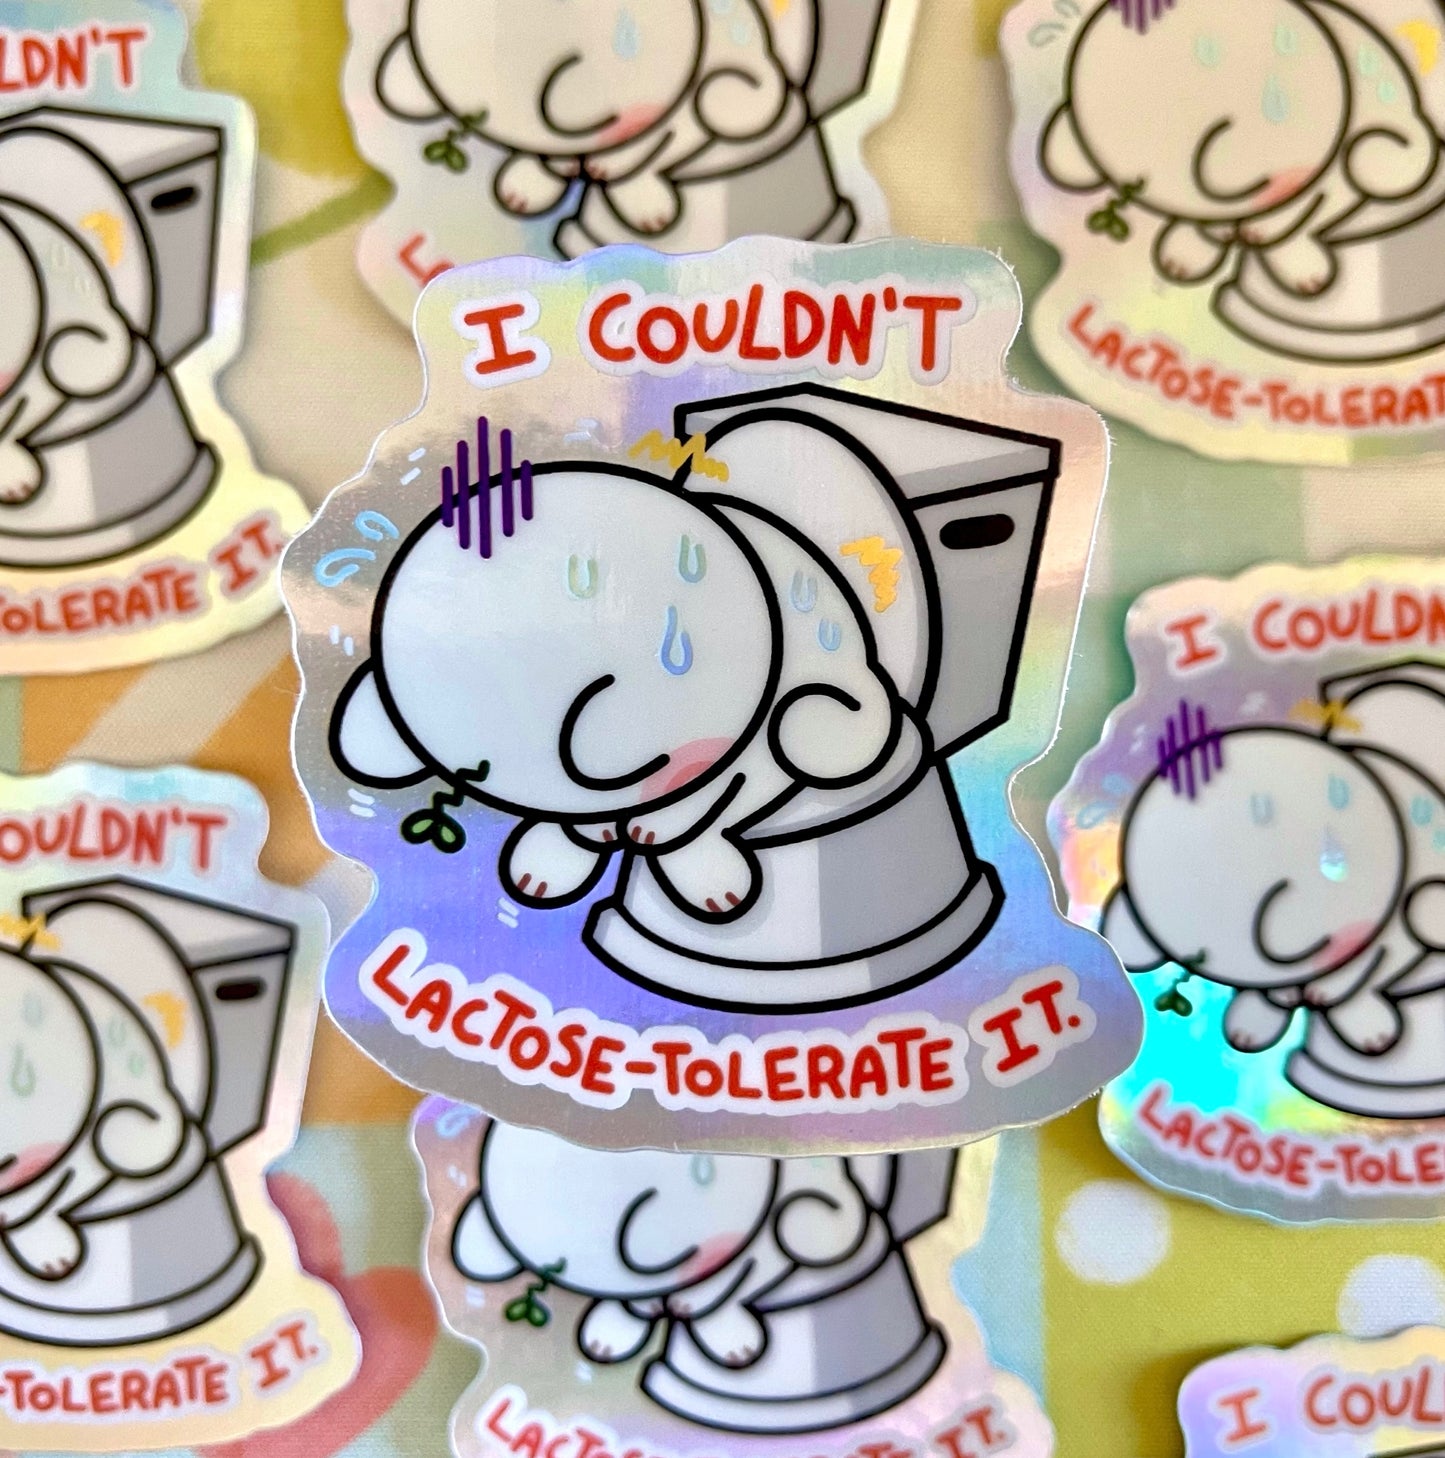 I Couldn’t Lactose-Tolerate It Sticker